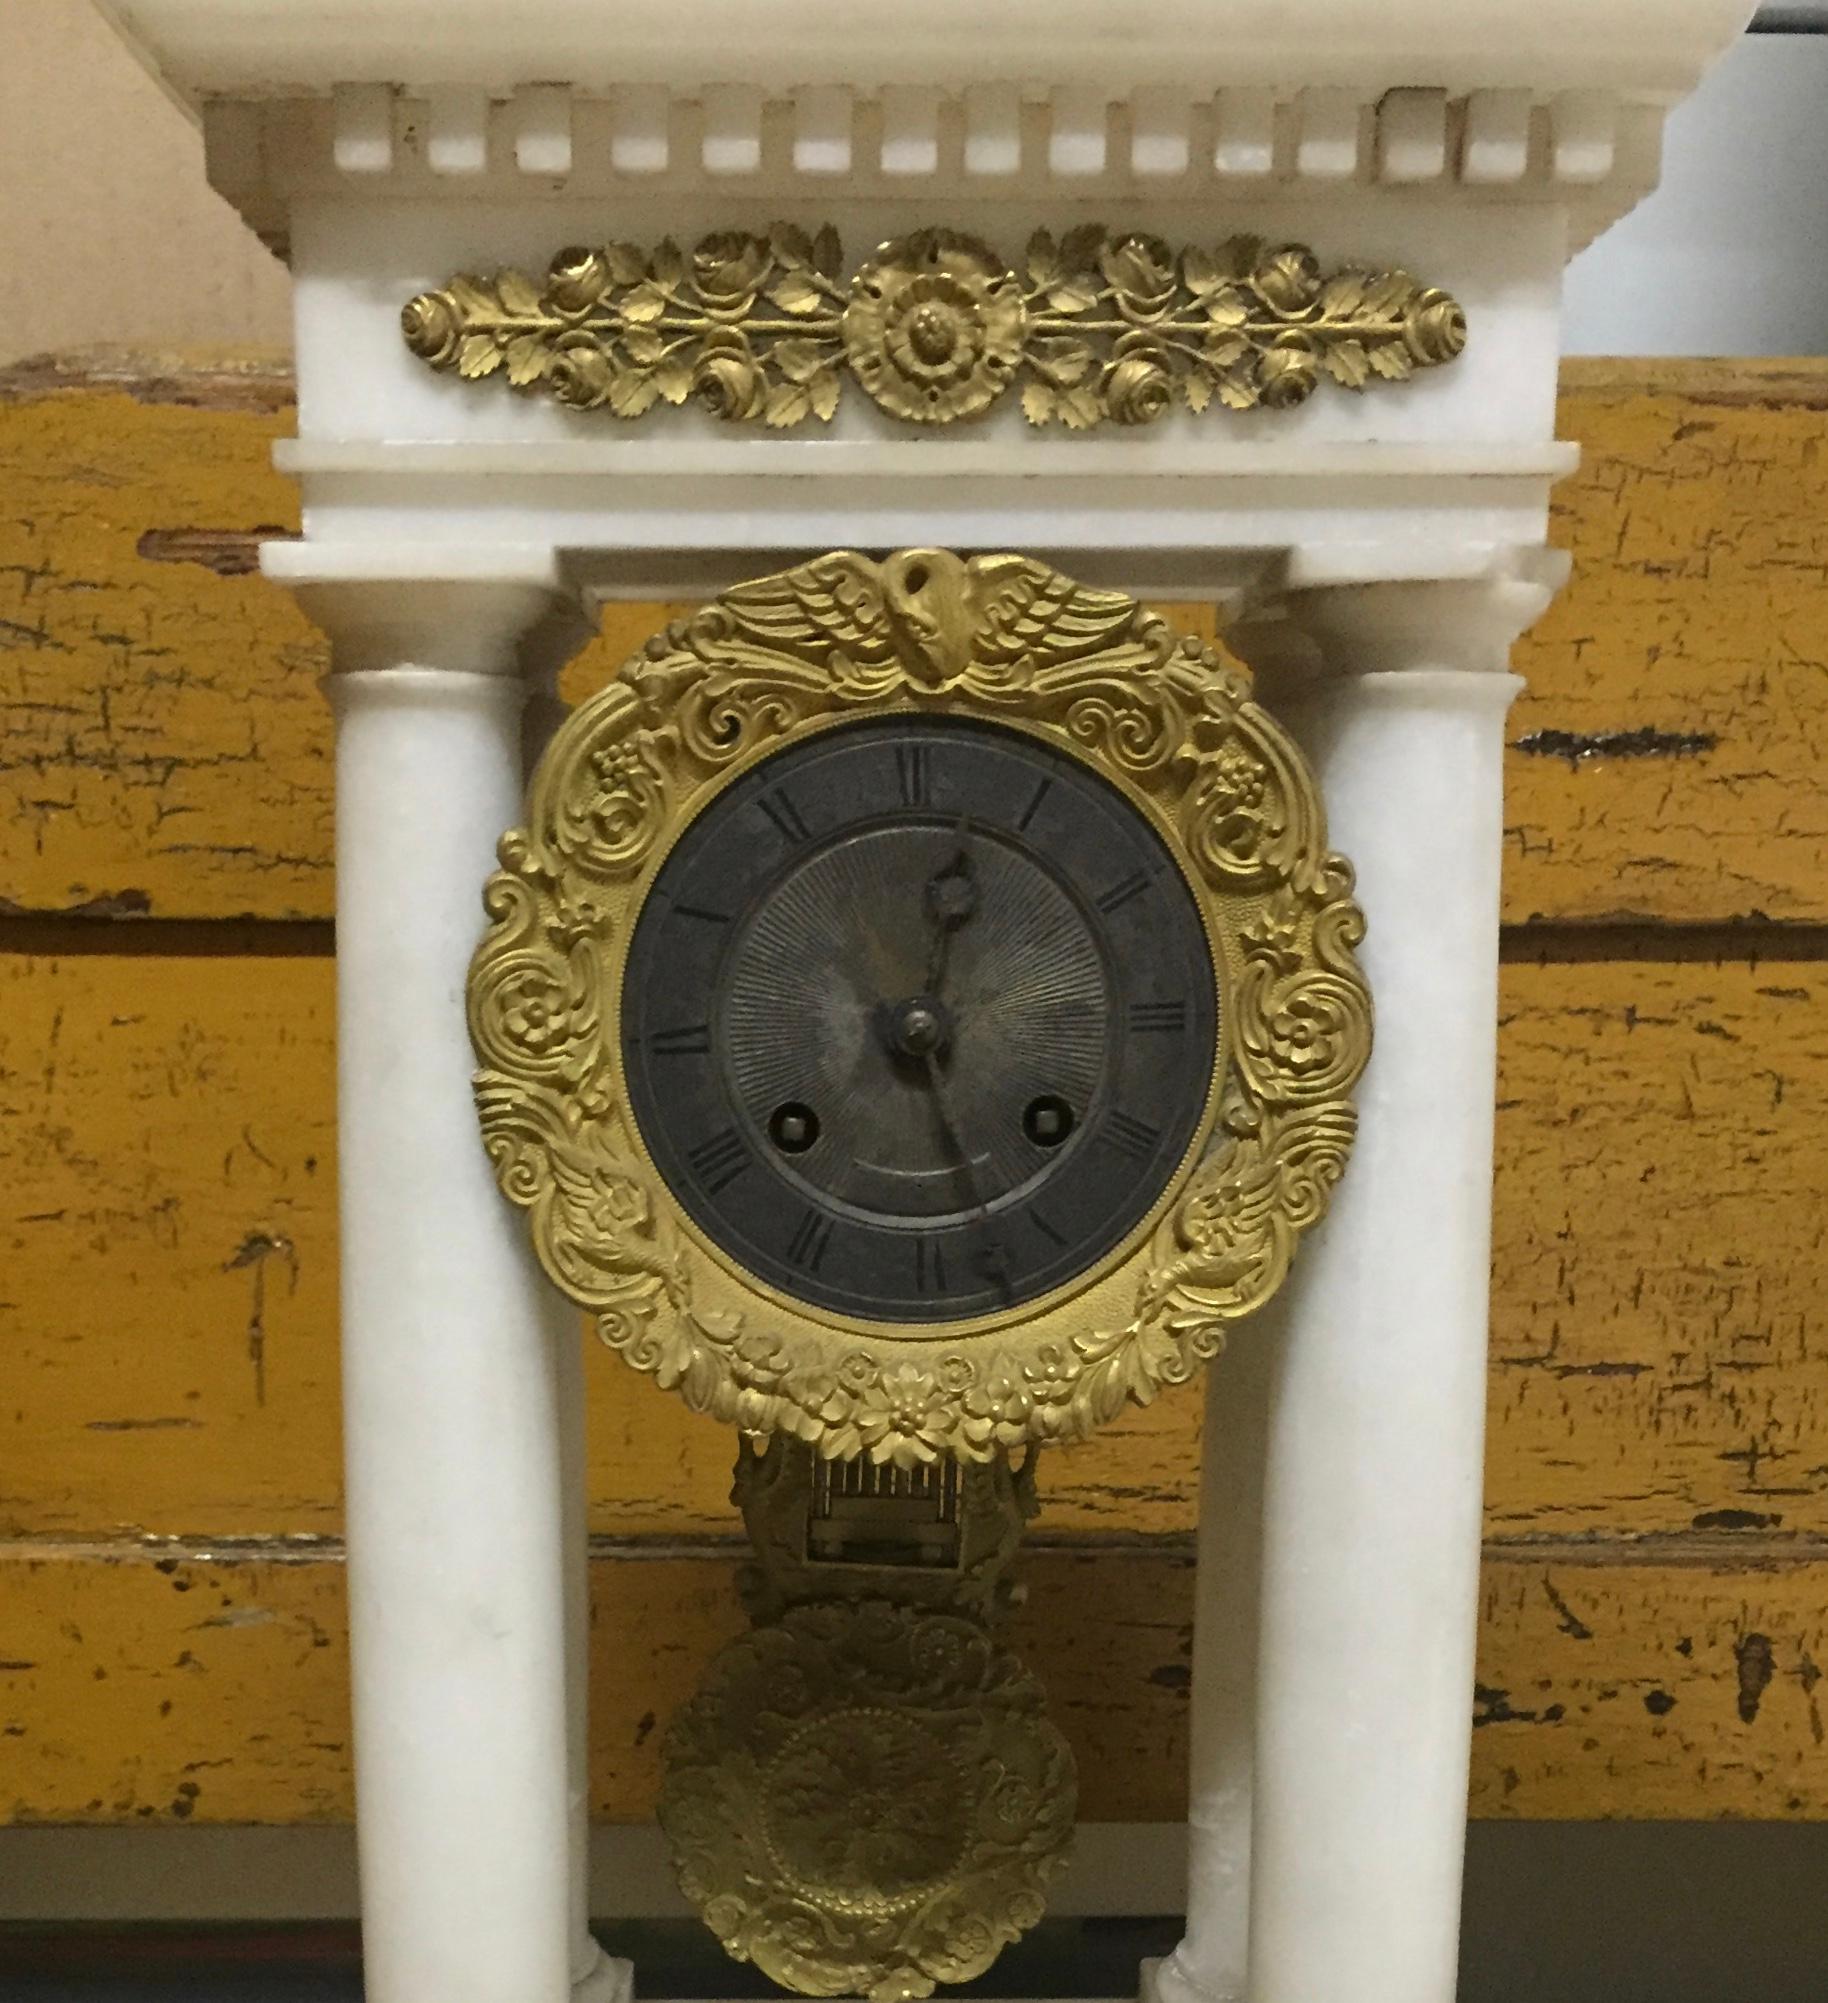 With tasteful embellishments of brass on the pure marble surface, this Charles X mantel clock is restrained and most attractive. The time piece is distinctly architectural in form, a piece inspired by the classical Greek structures so revered during